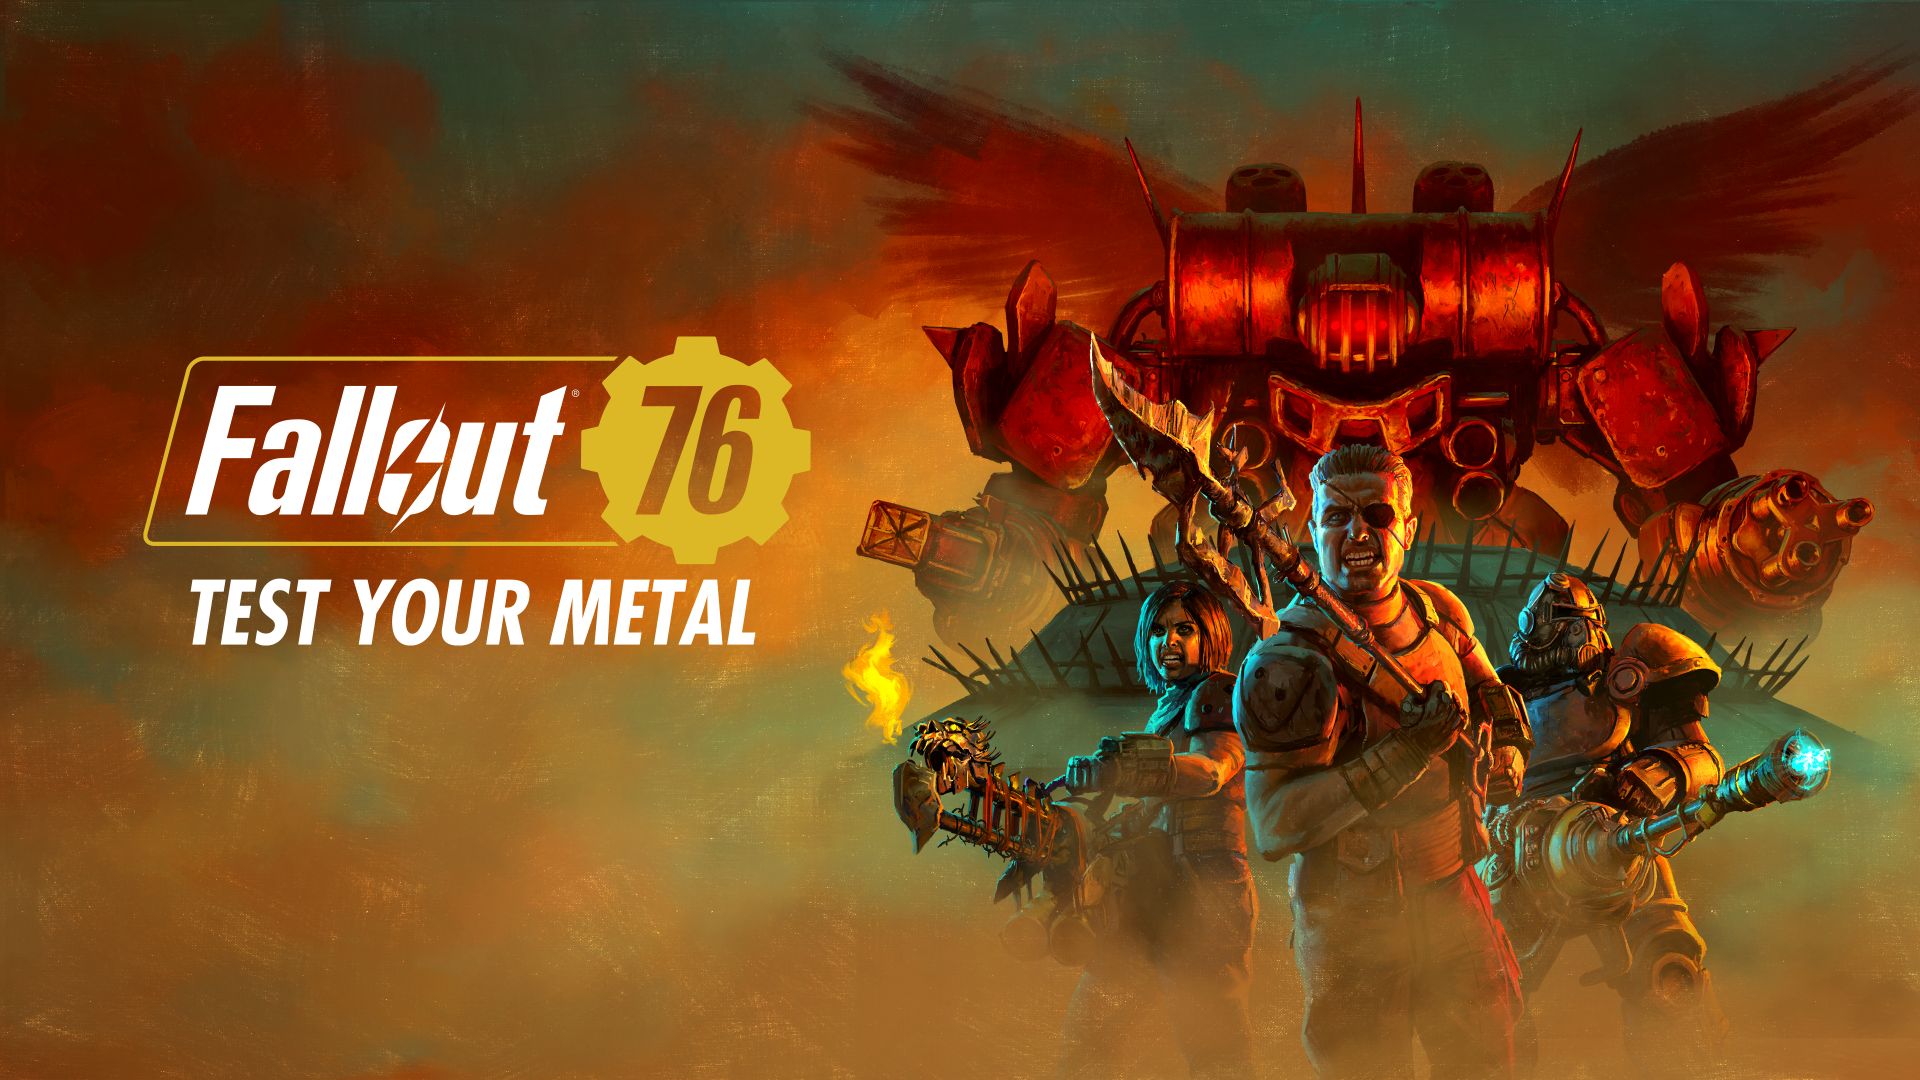 Fallout 76 - Test Your Metal Update